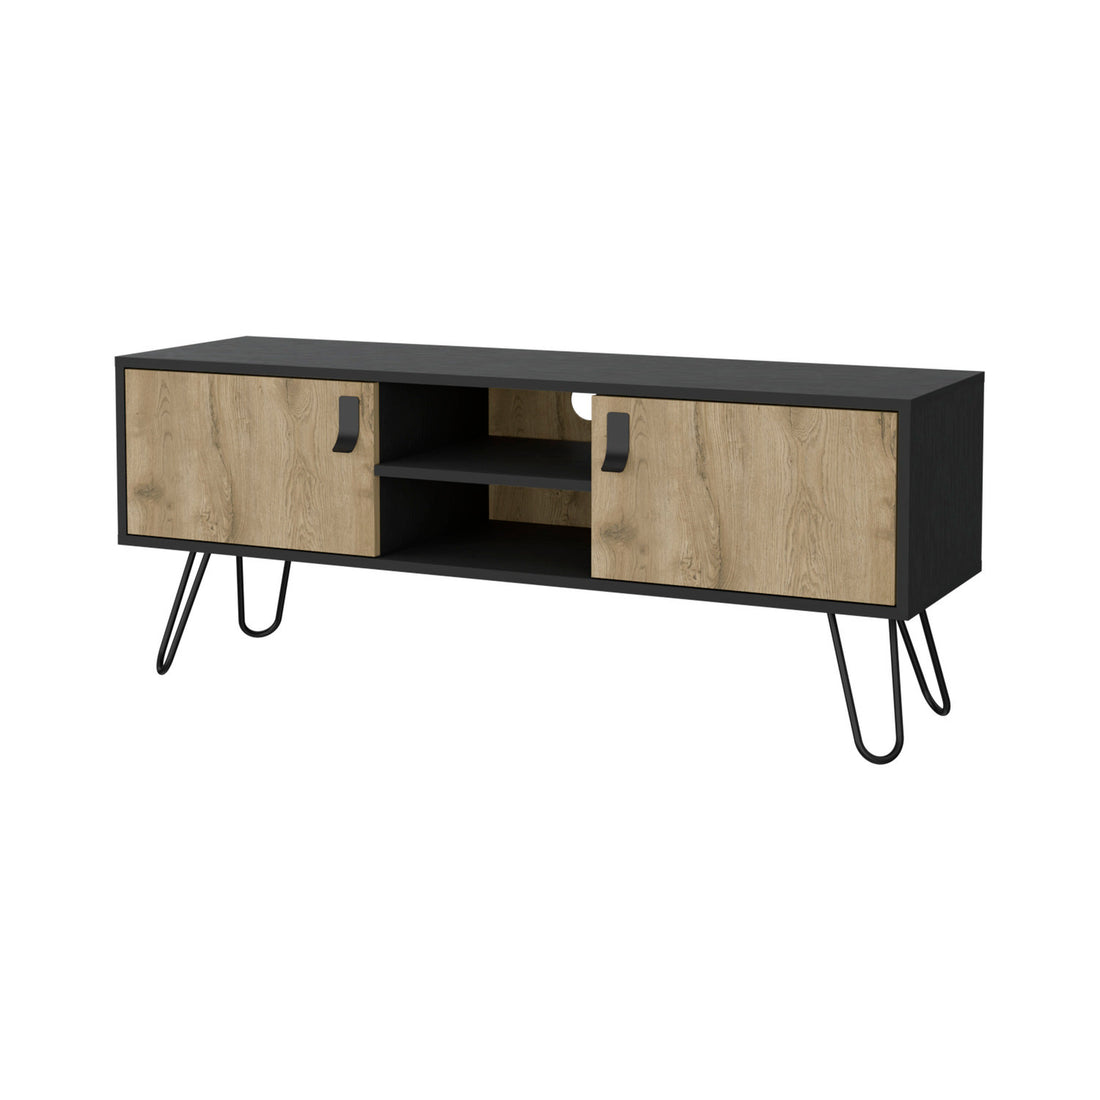 Kimball Hairpin Legs Tv Rack, Media Unit With 2